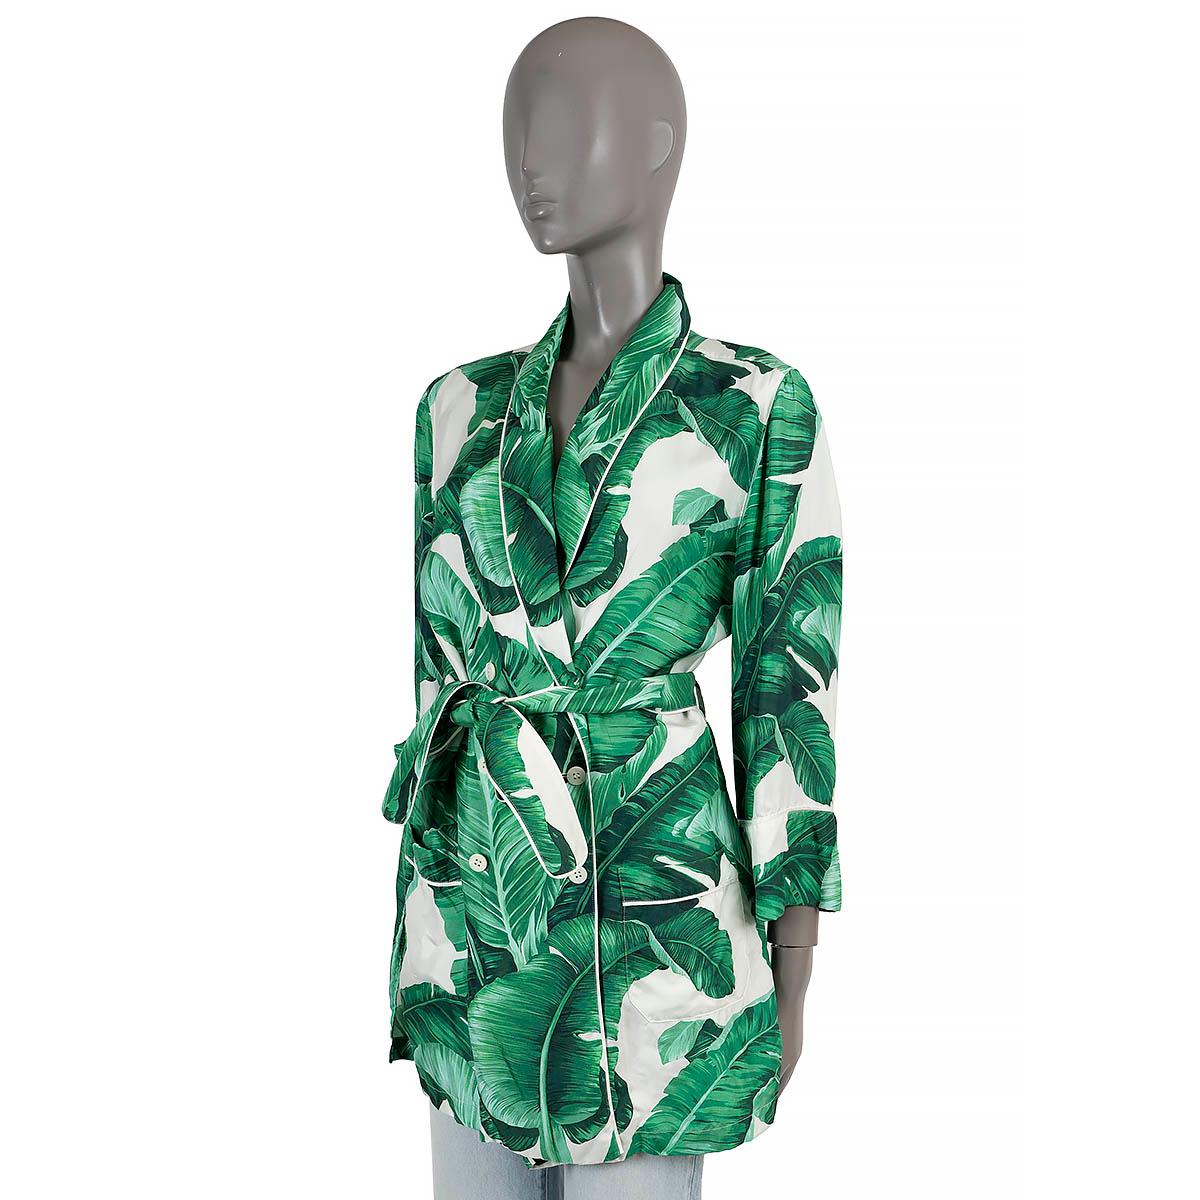 100% authentic Dolce & Gabbana belted doubel-breasted jacket green and white silk (please note the content tag is missing), with banana leaf print. Features a shal collar and two patch pockets. Closes with white buttons on the front and is unlined.